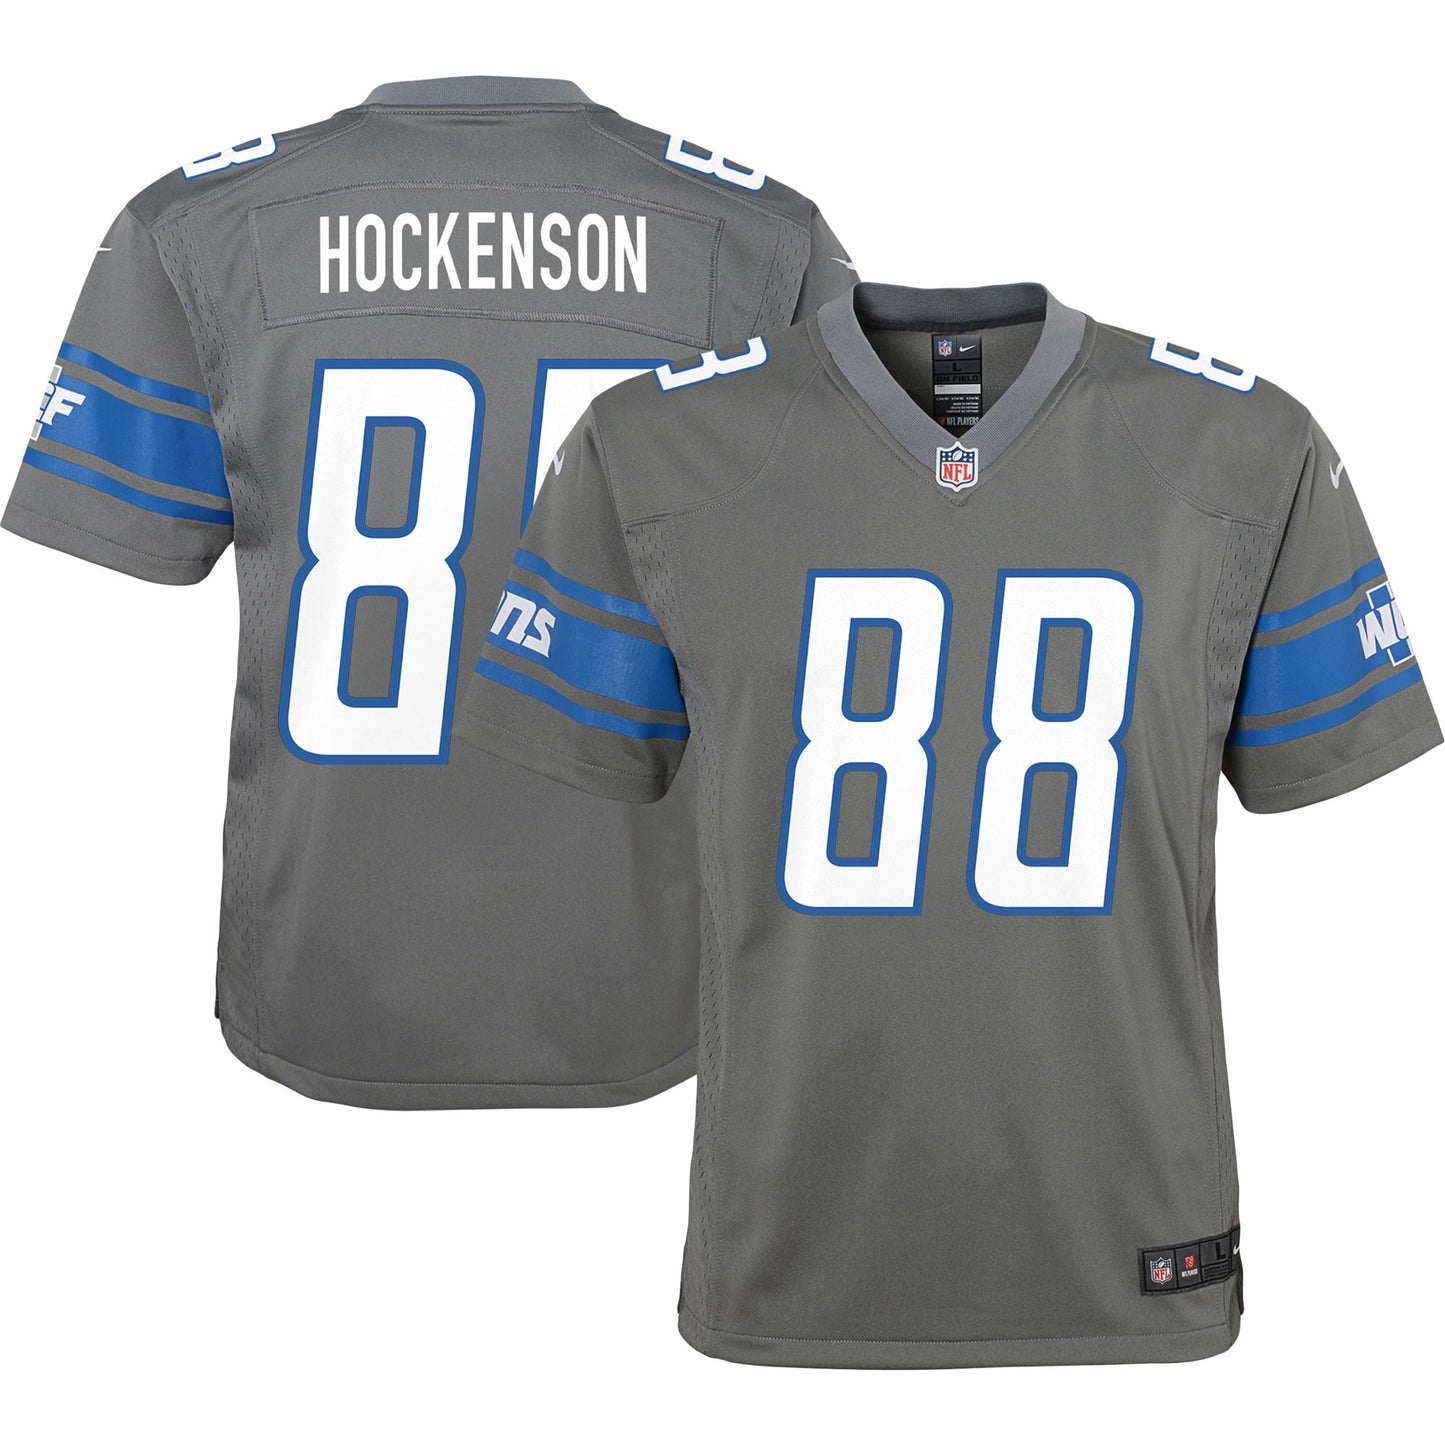 T.J. Hockenson Detroit Lions Nike Youth Team Game Jersey - Silver